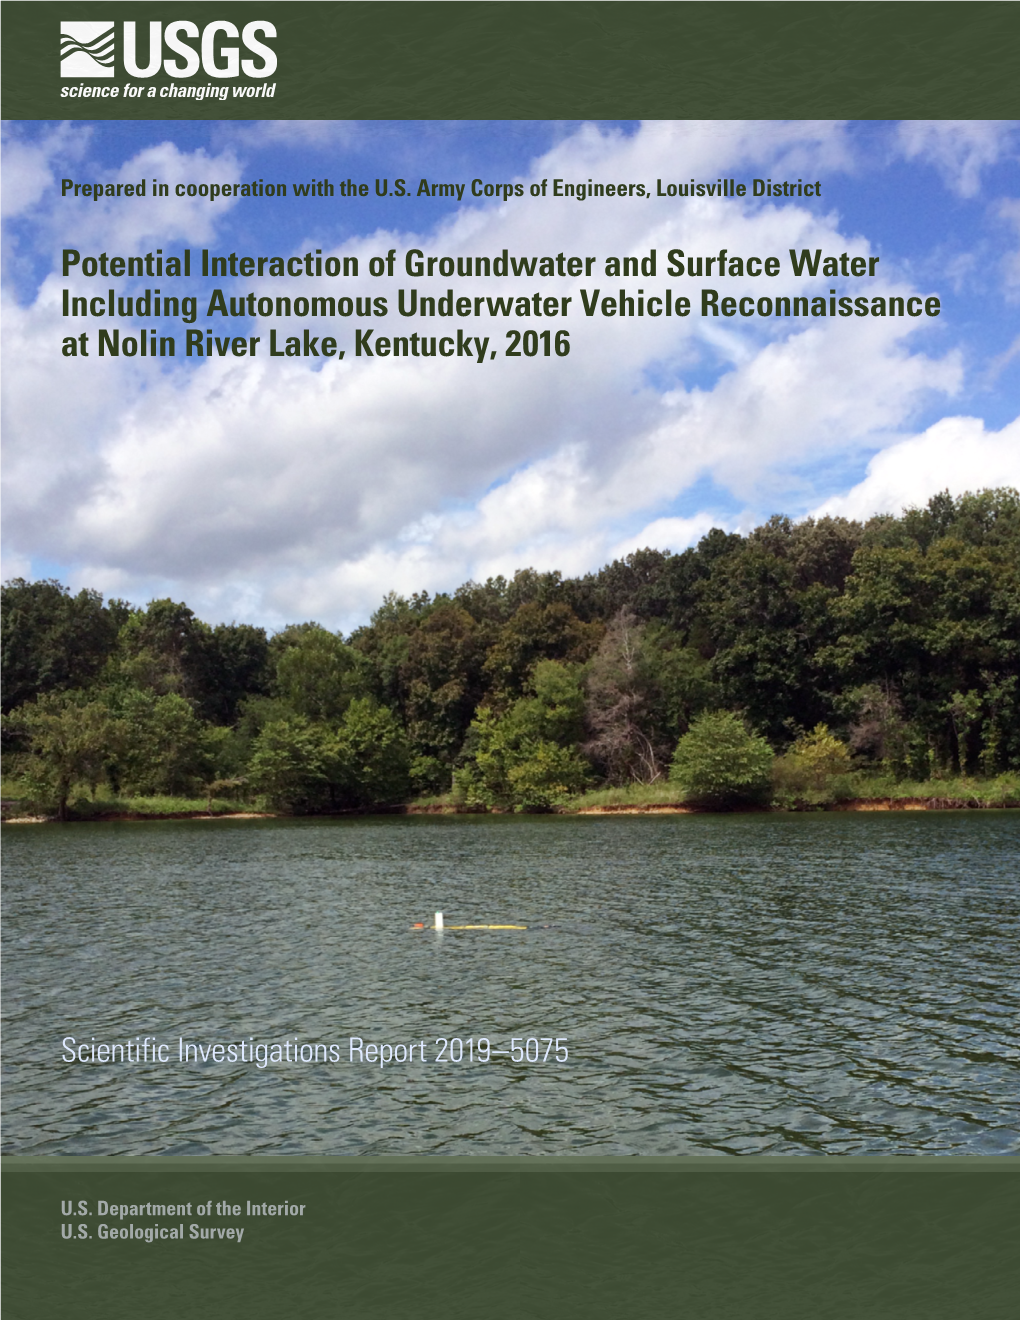 Potential Interaction of Groundwater and Surface Water Including Autonomous Underwater Vehicle Reconnaissance at Nolin River Lake, Kentucky, 2016